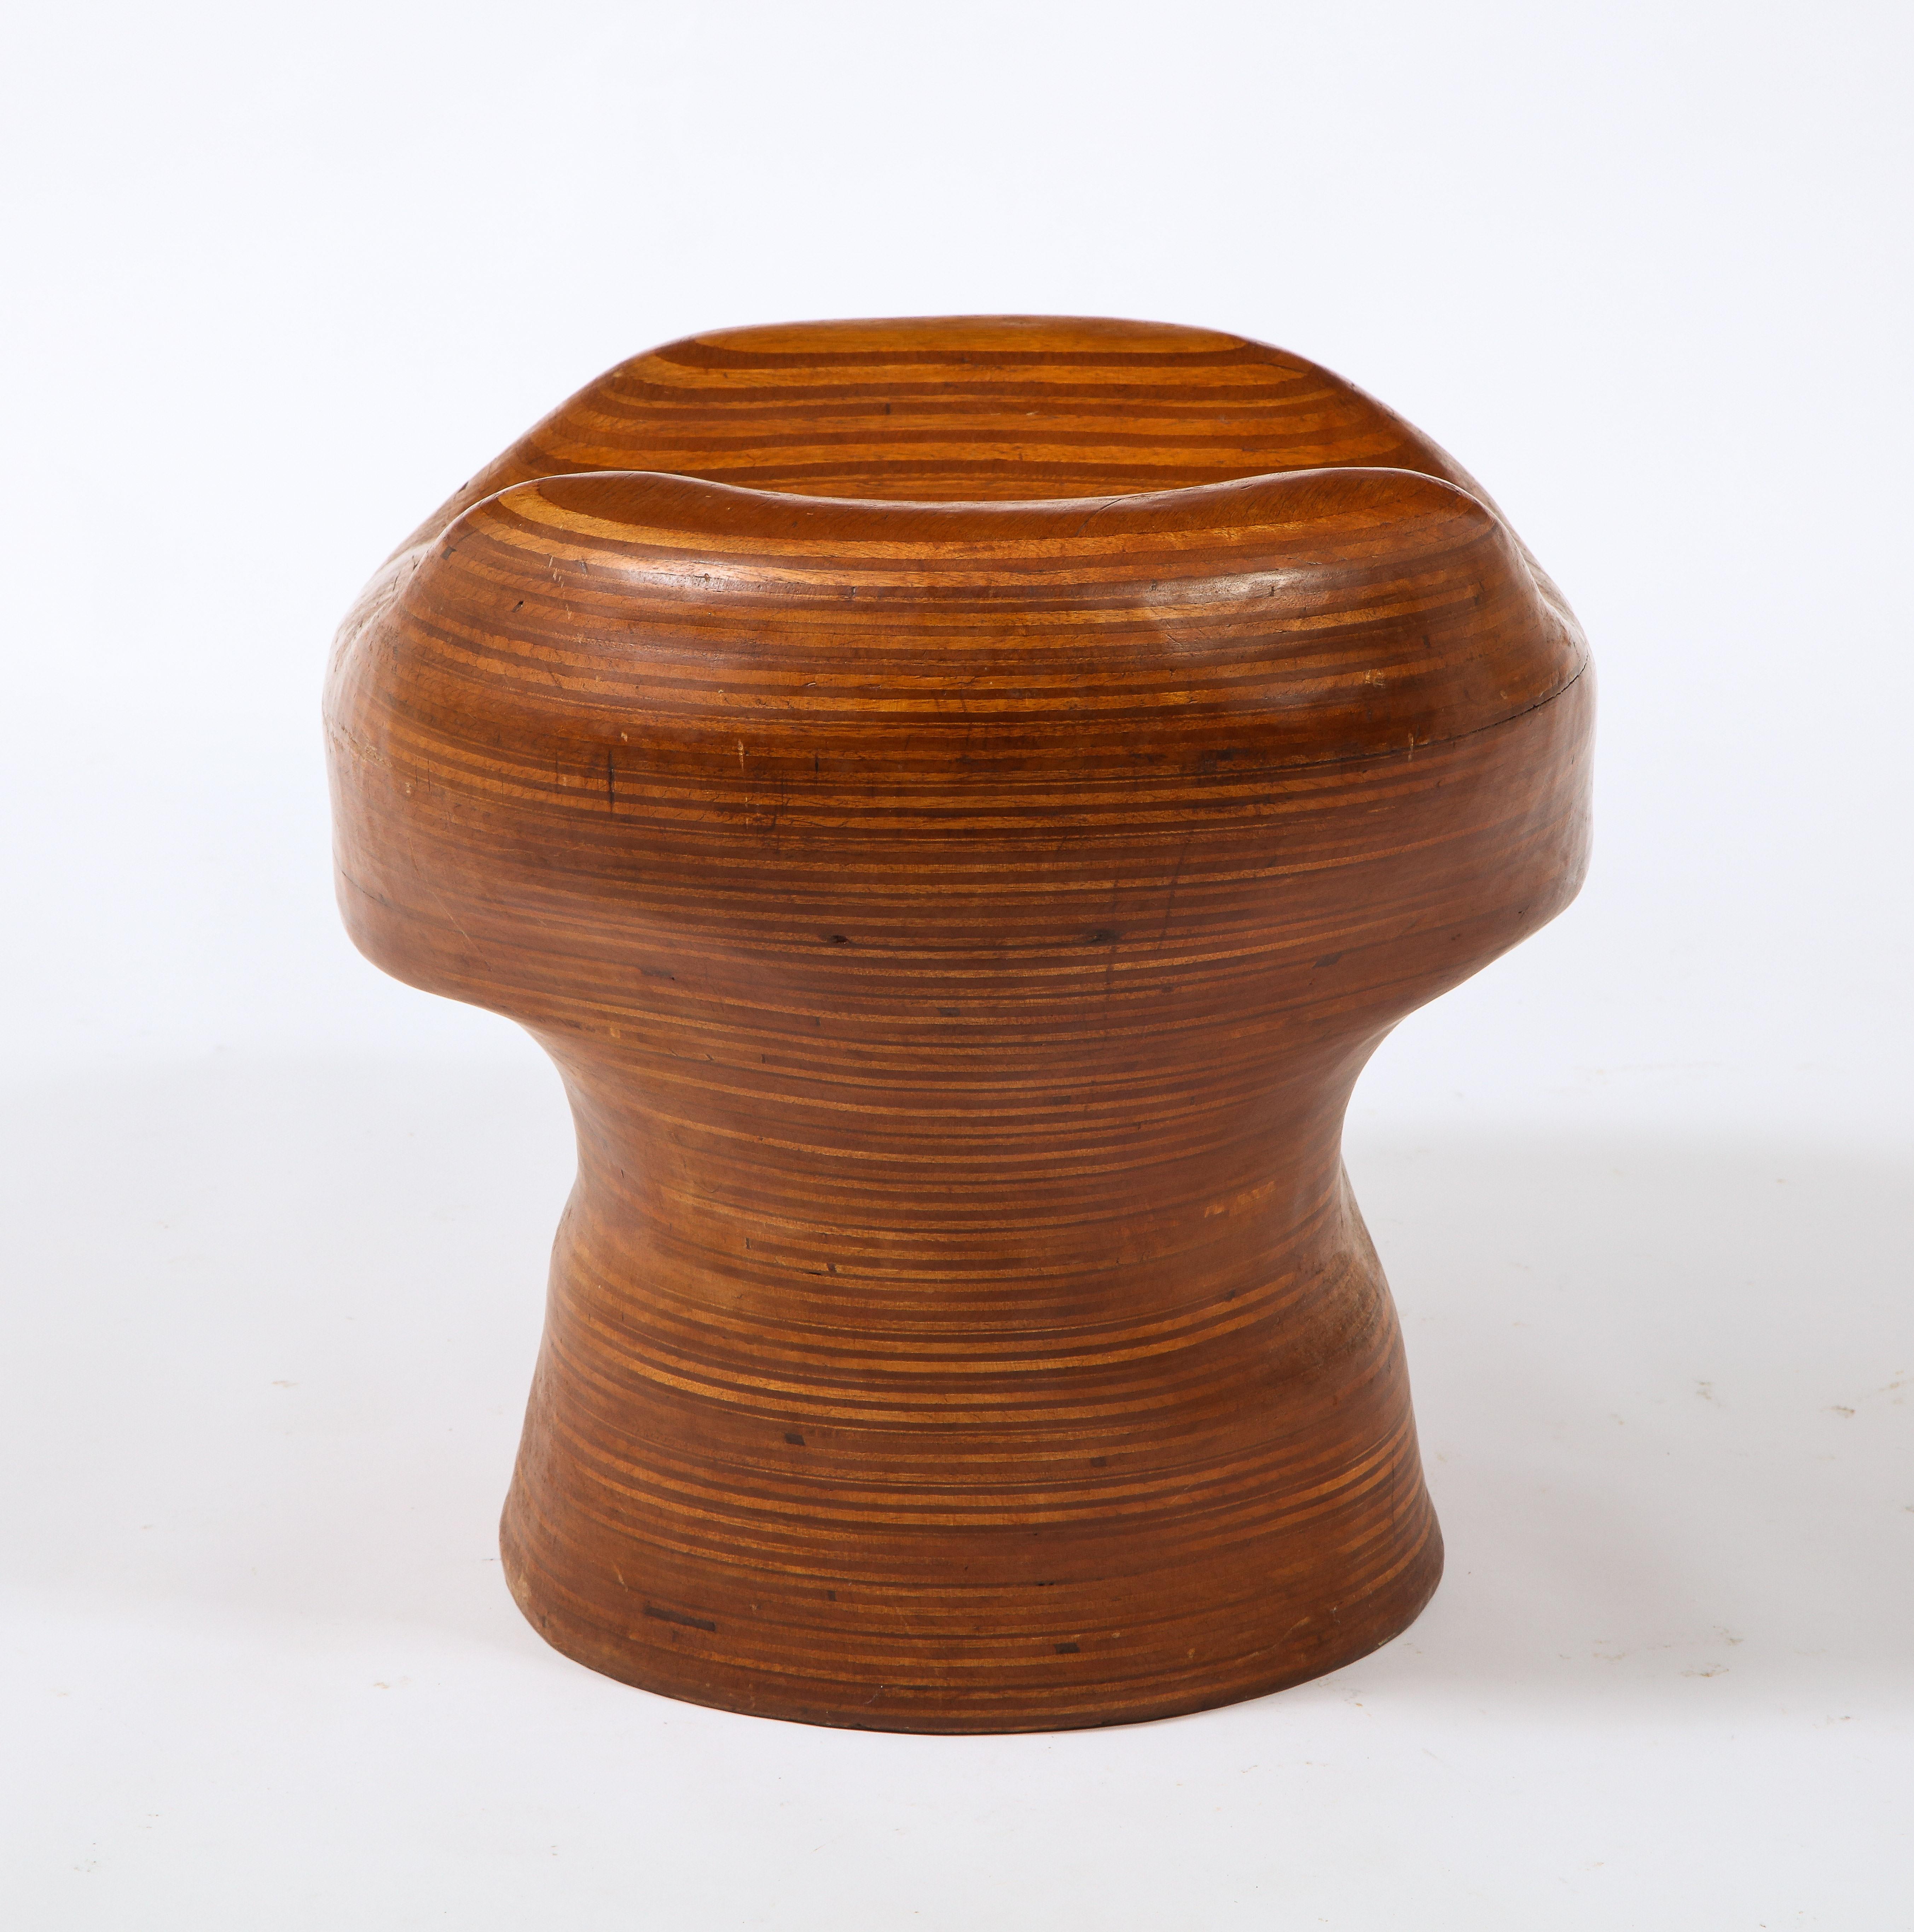 Denis Cospen Biomorphic Stool in Laminated Wood, France 1960's For Sale 8